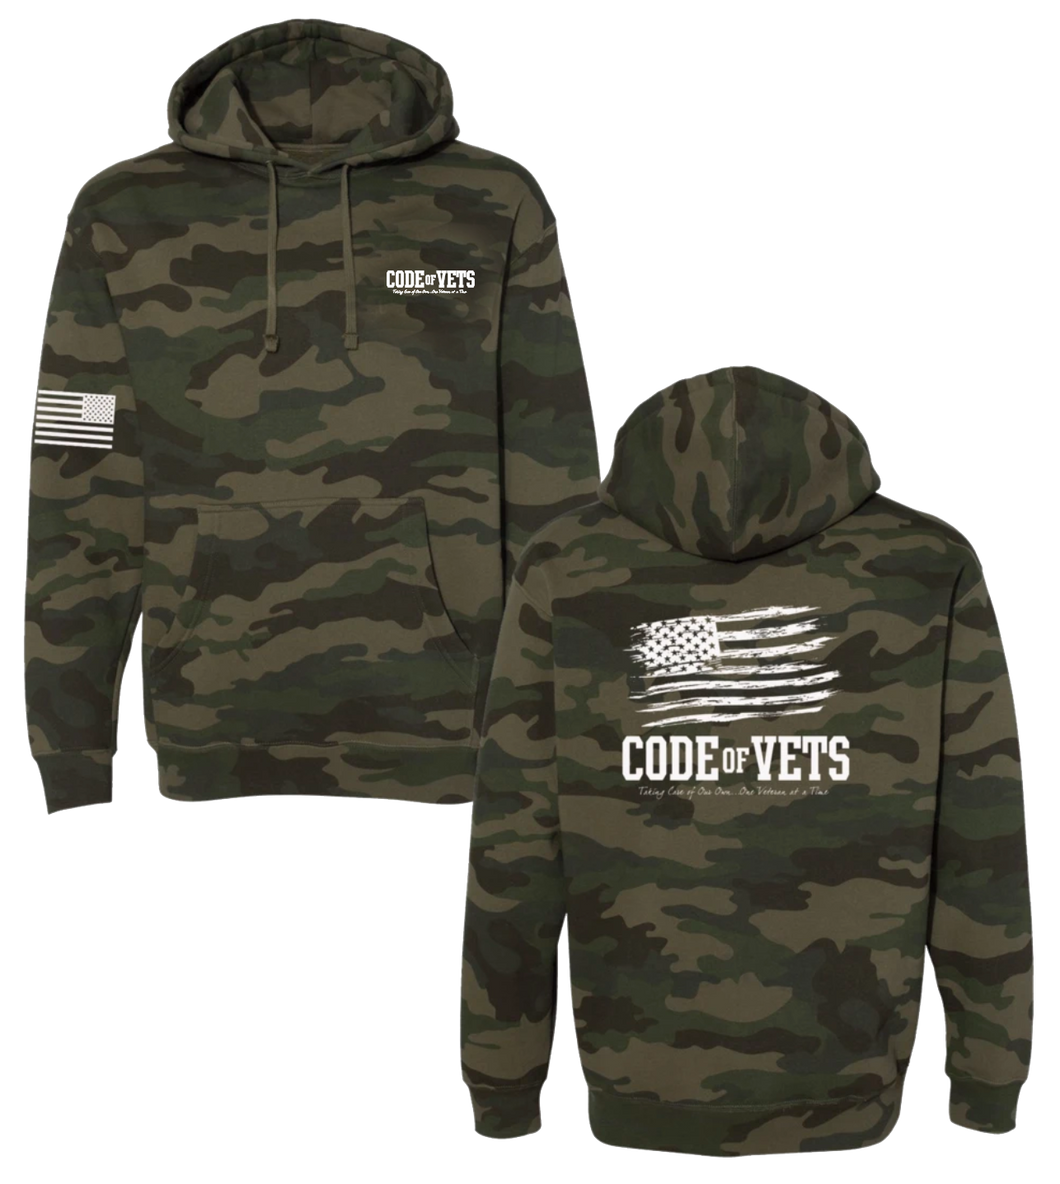 Code of Vets - Hoodie - Camo (Lightweight Fitted) Small & Medium Only